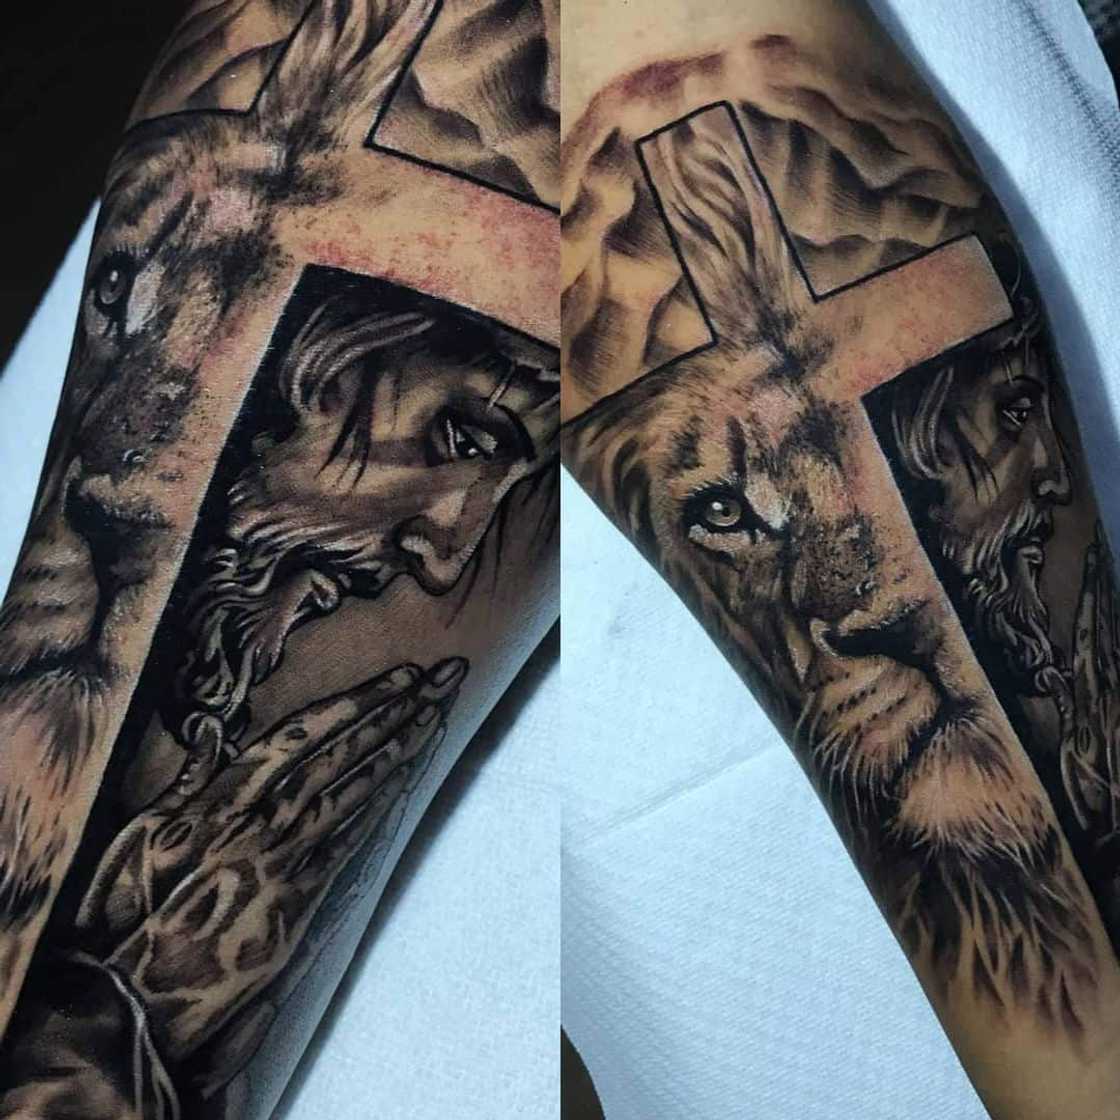 Lion with a cross on the eye tattoo